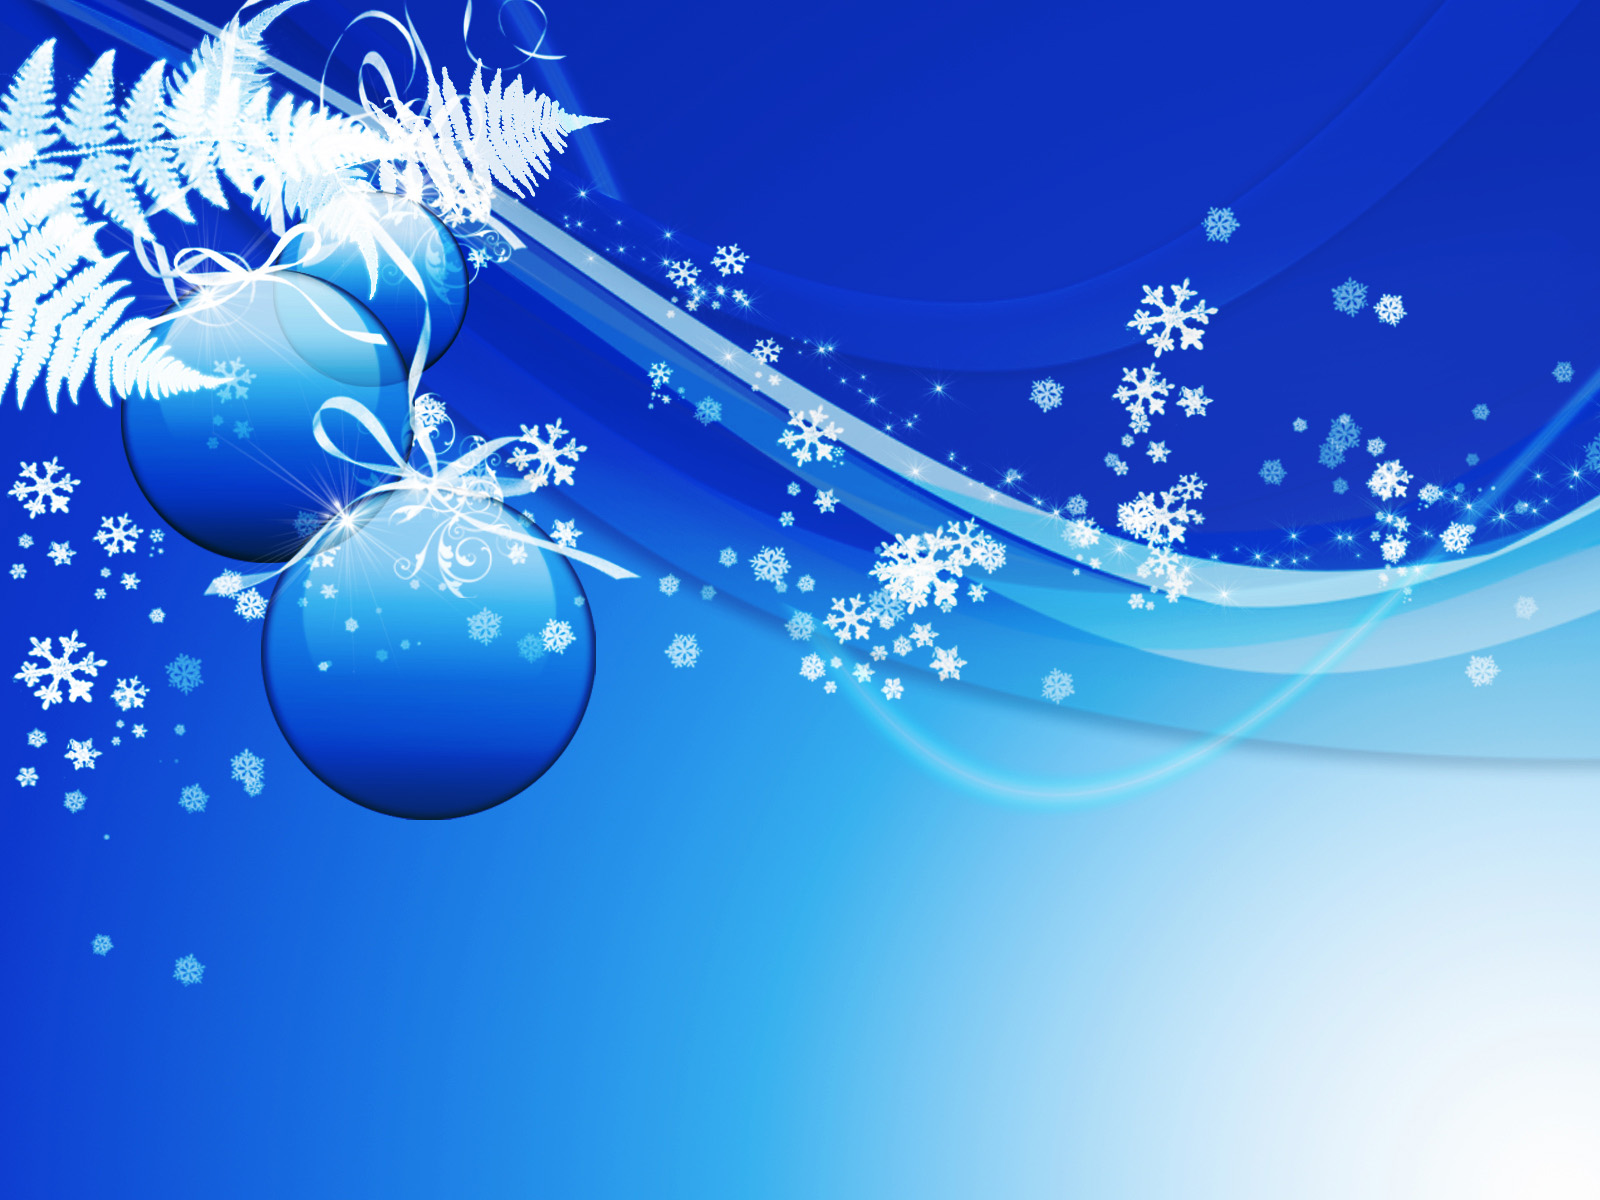 Christmas Holiday Background Wallpaper High Definition